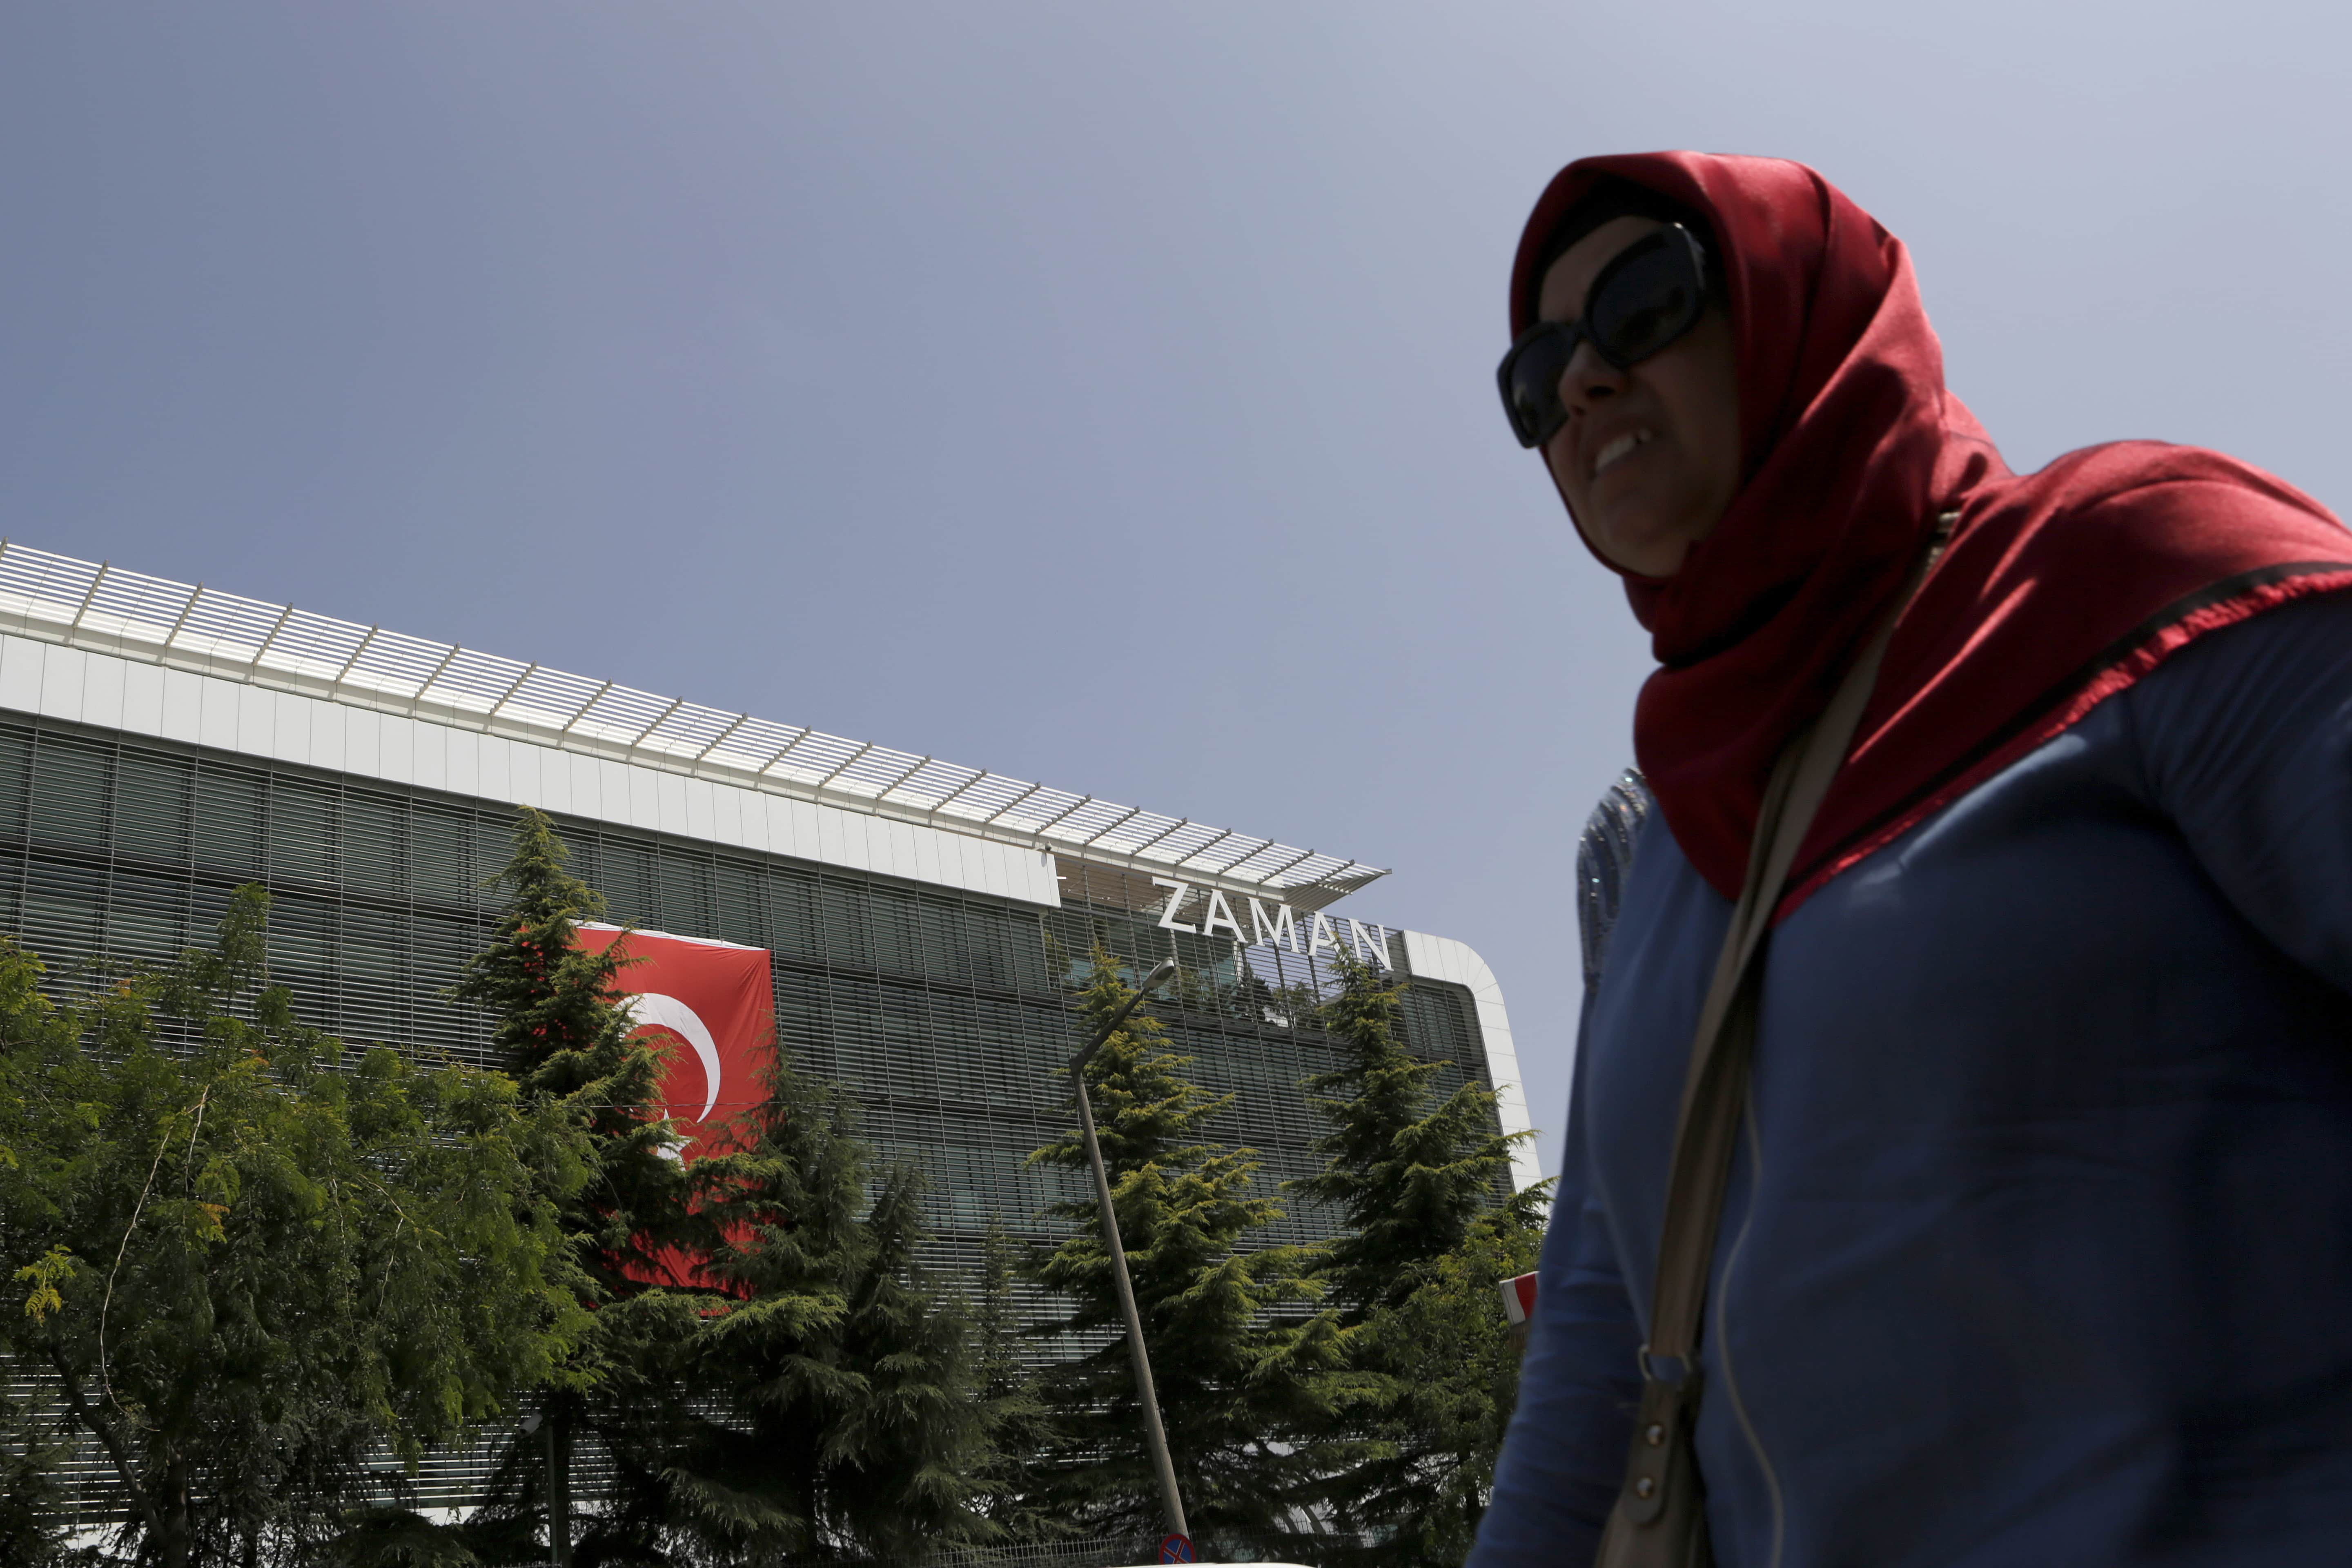 A woman walks past the headquarters of 'Zaman' newspaper, after being closed by the government in Istanbul, 28 July 2016, AP Photo/Petros Karadjias